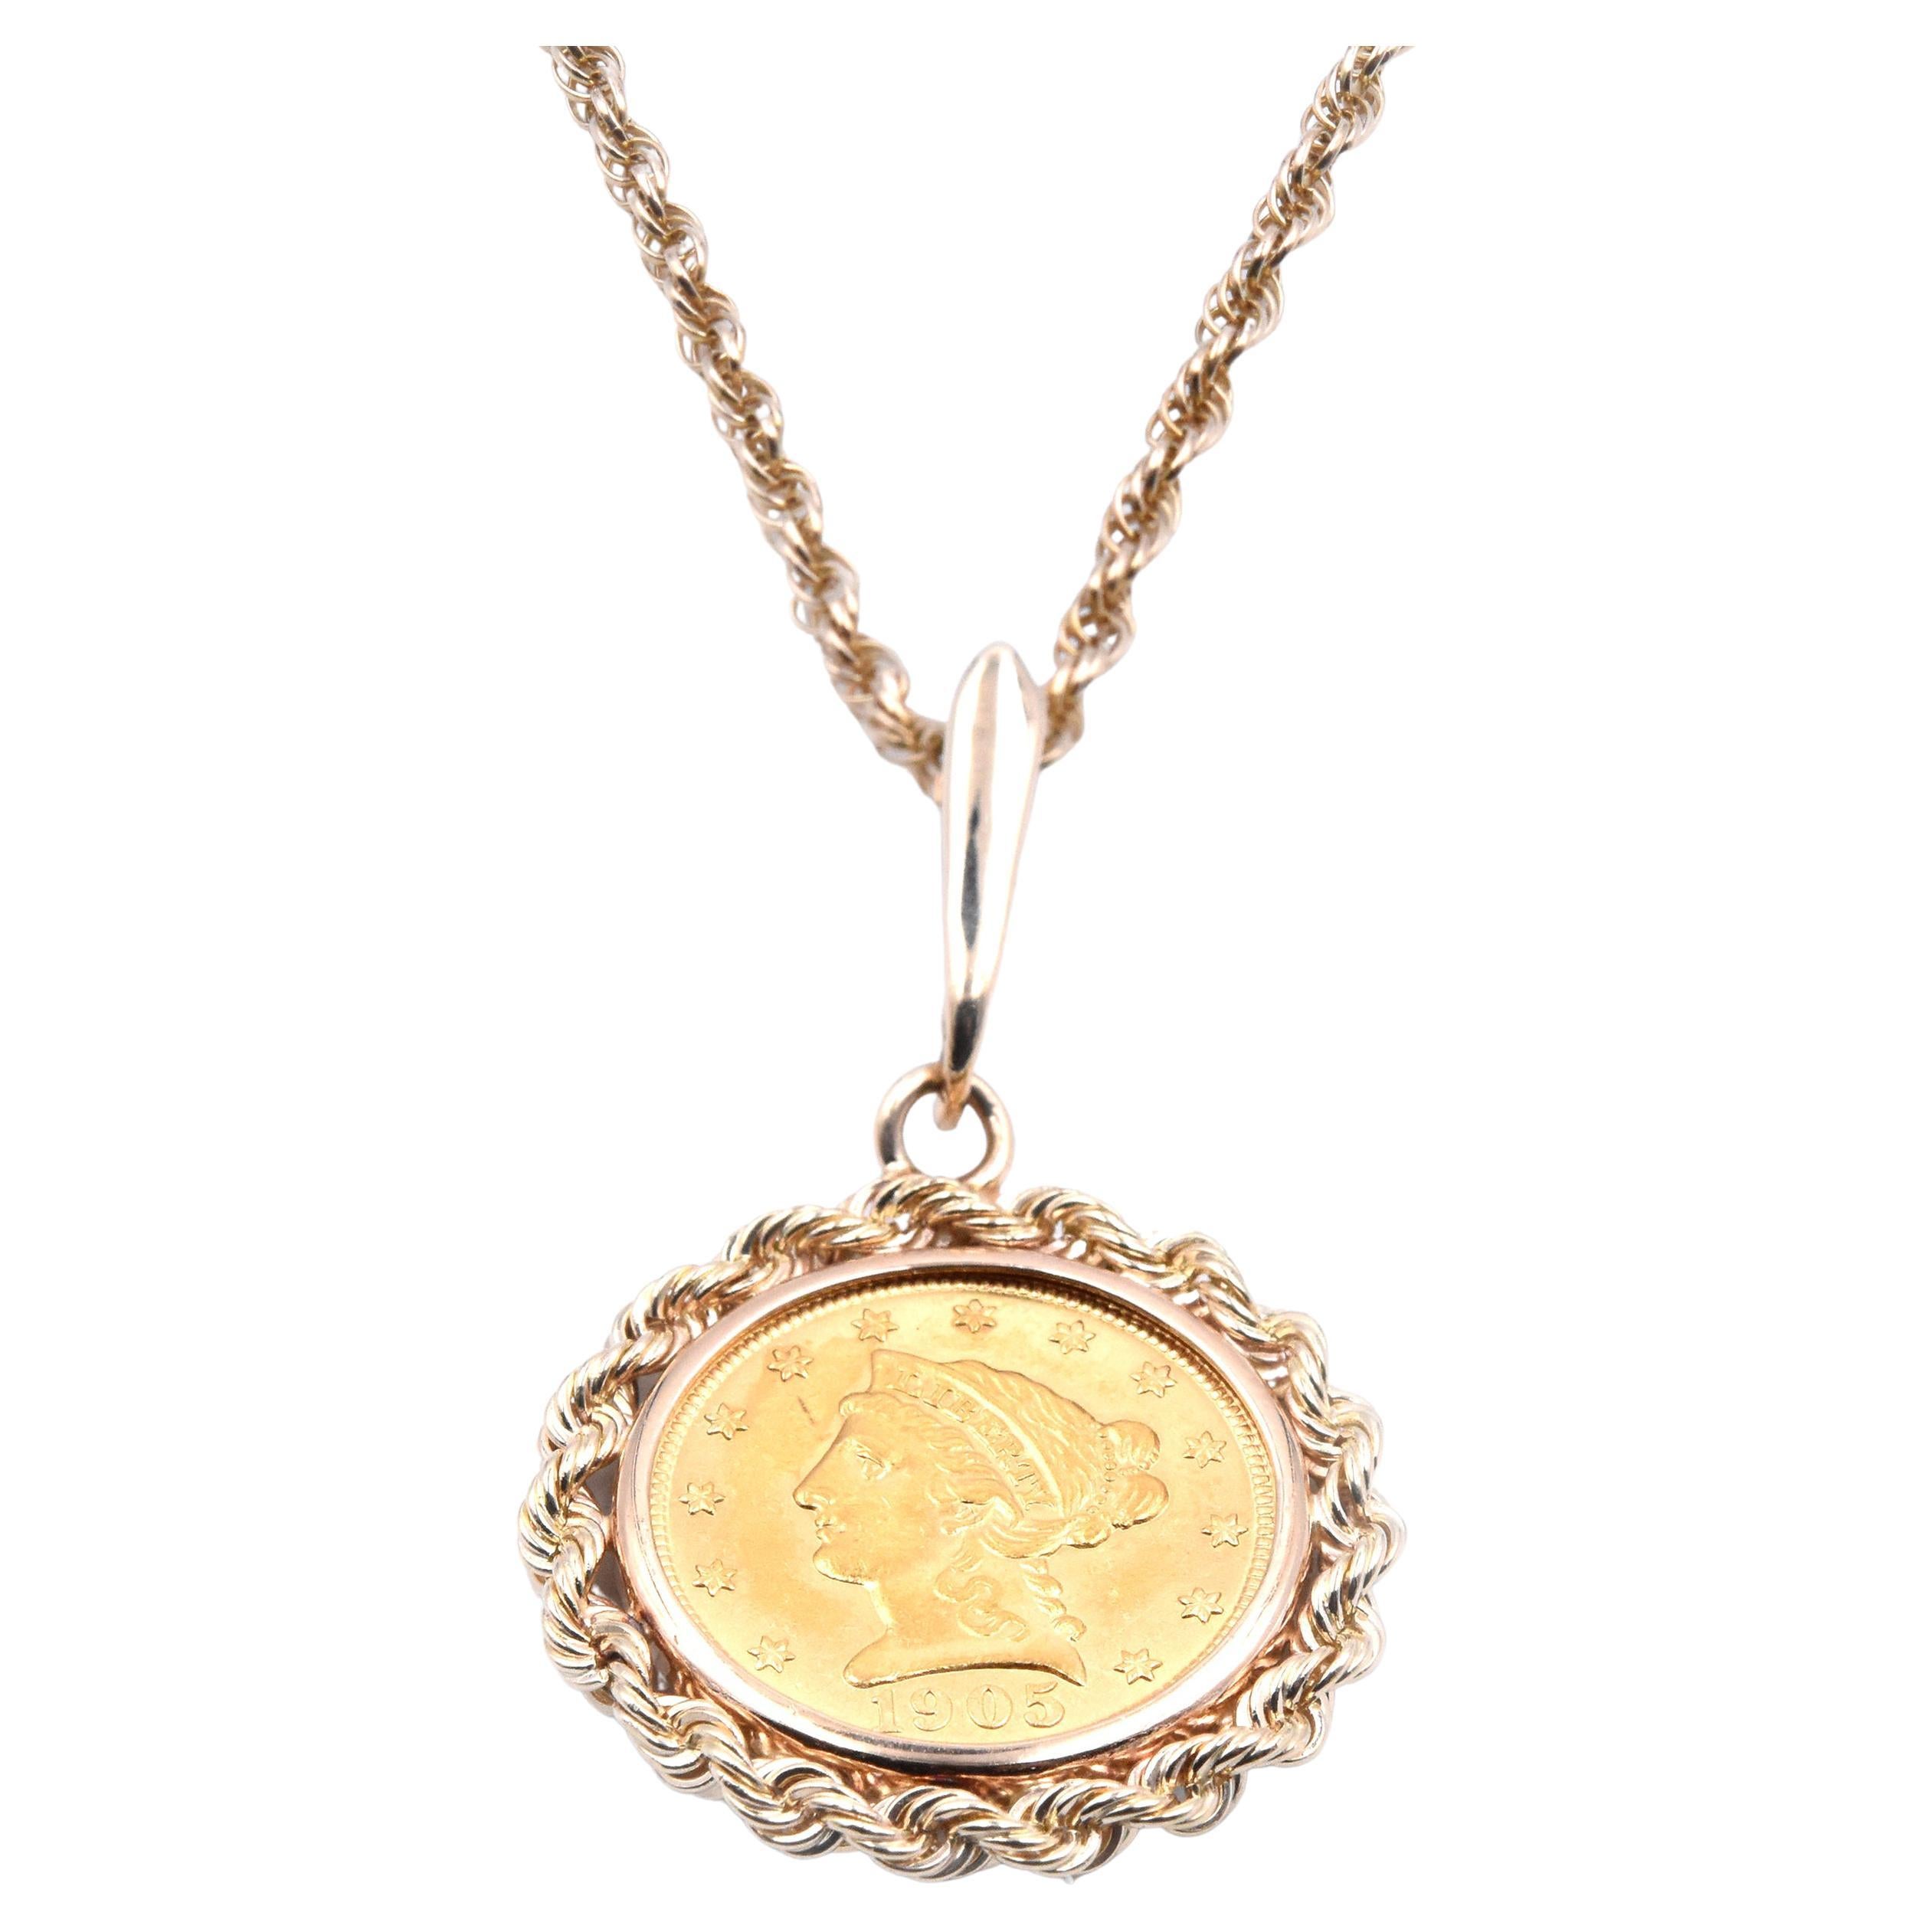 $2 ½ Liberty Coin on 14 Karat Yellow Gold Necklace